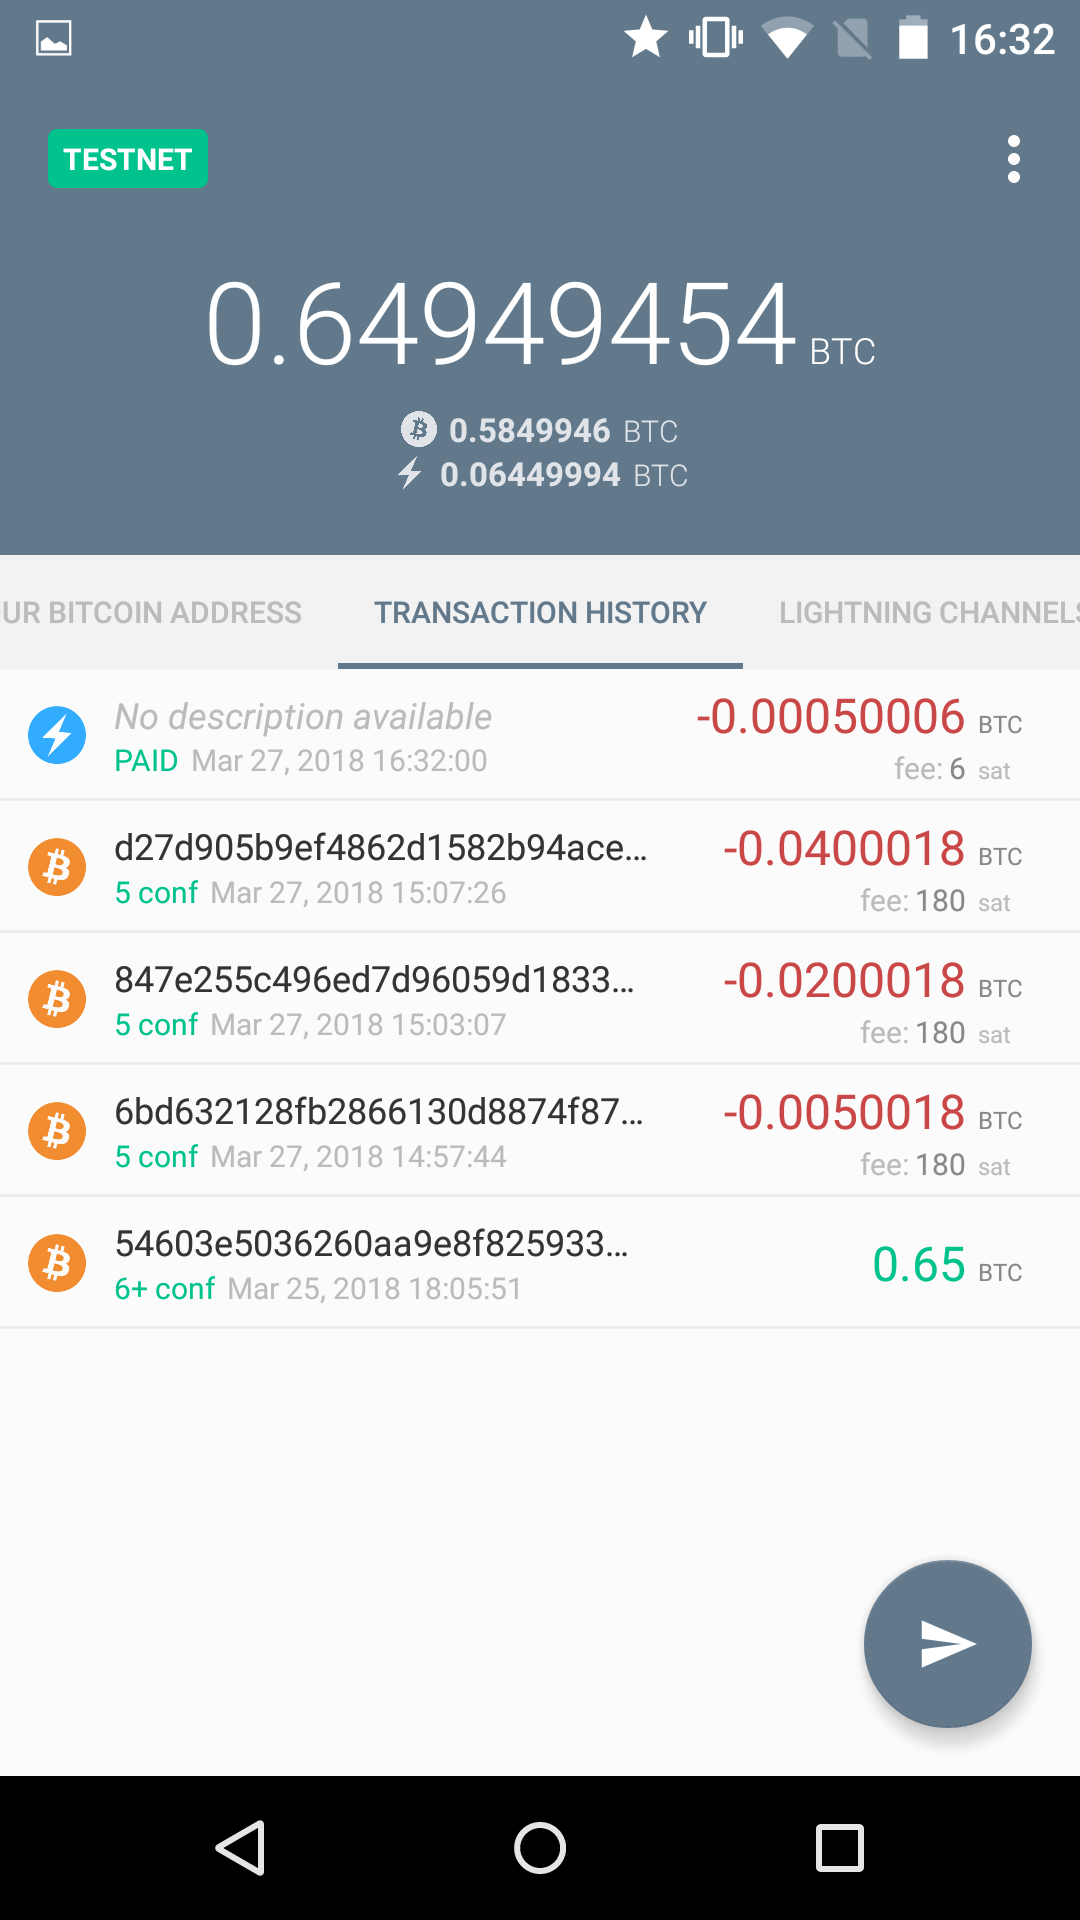 Eclair transaction history page populated